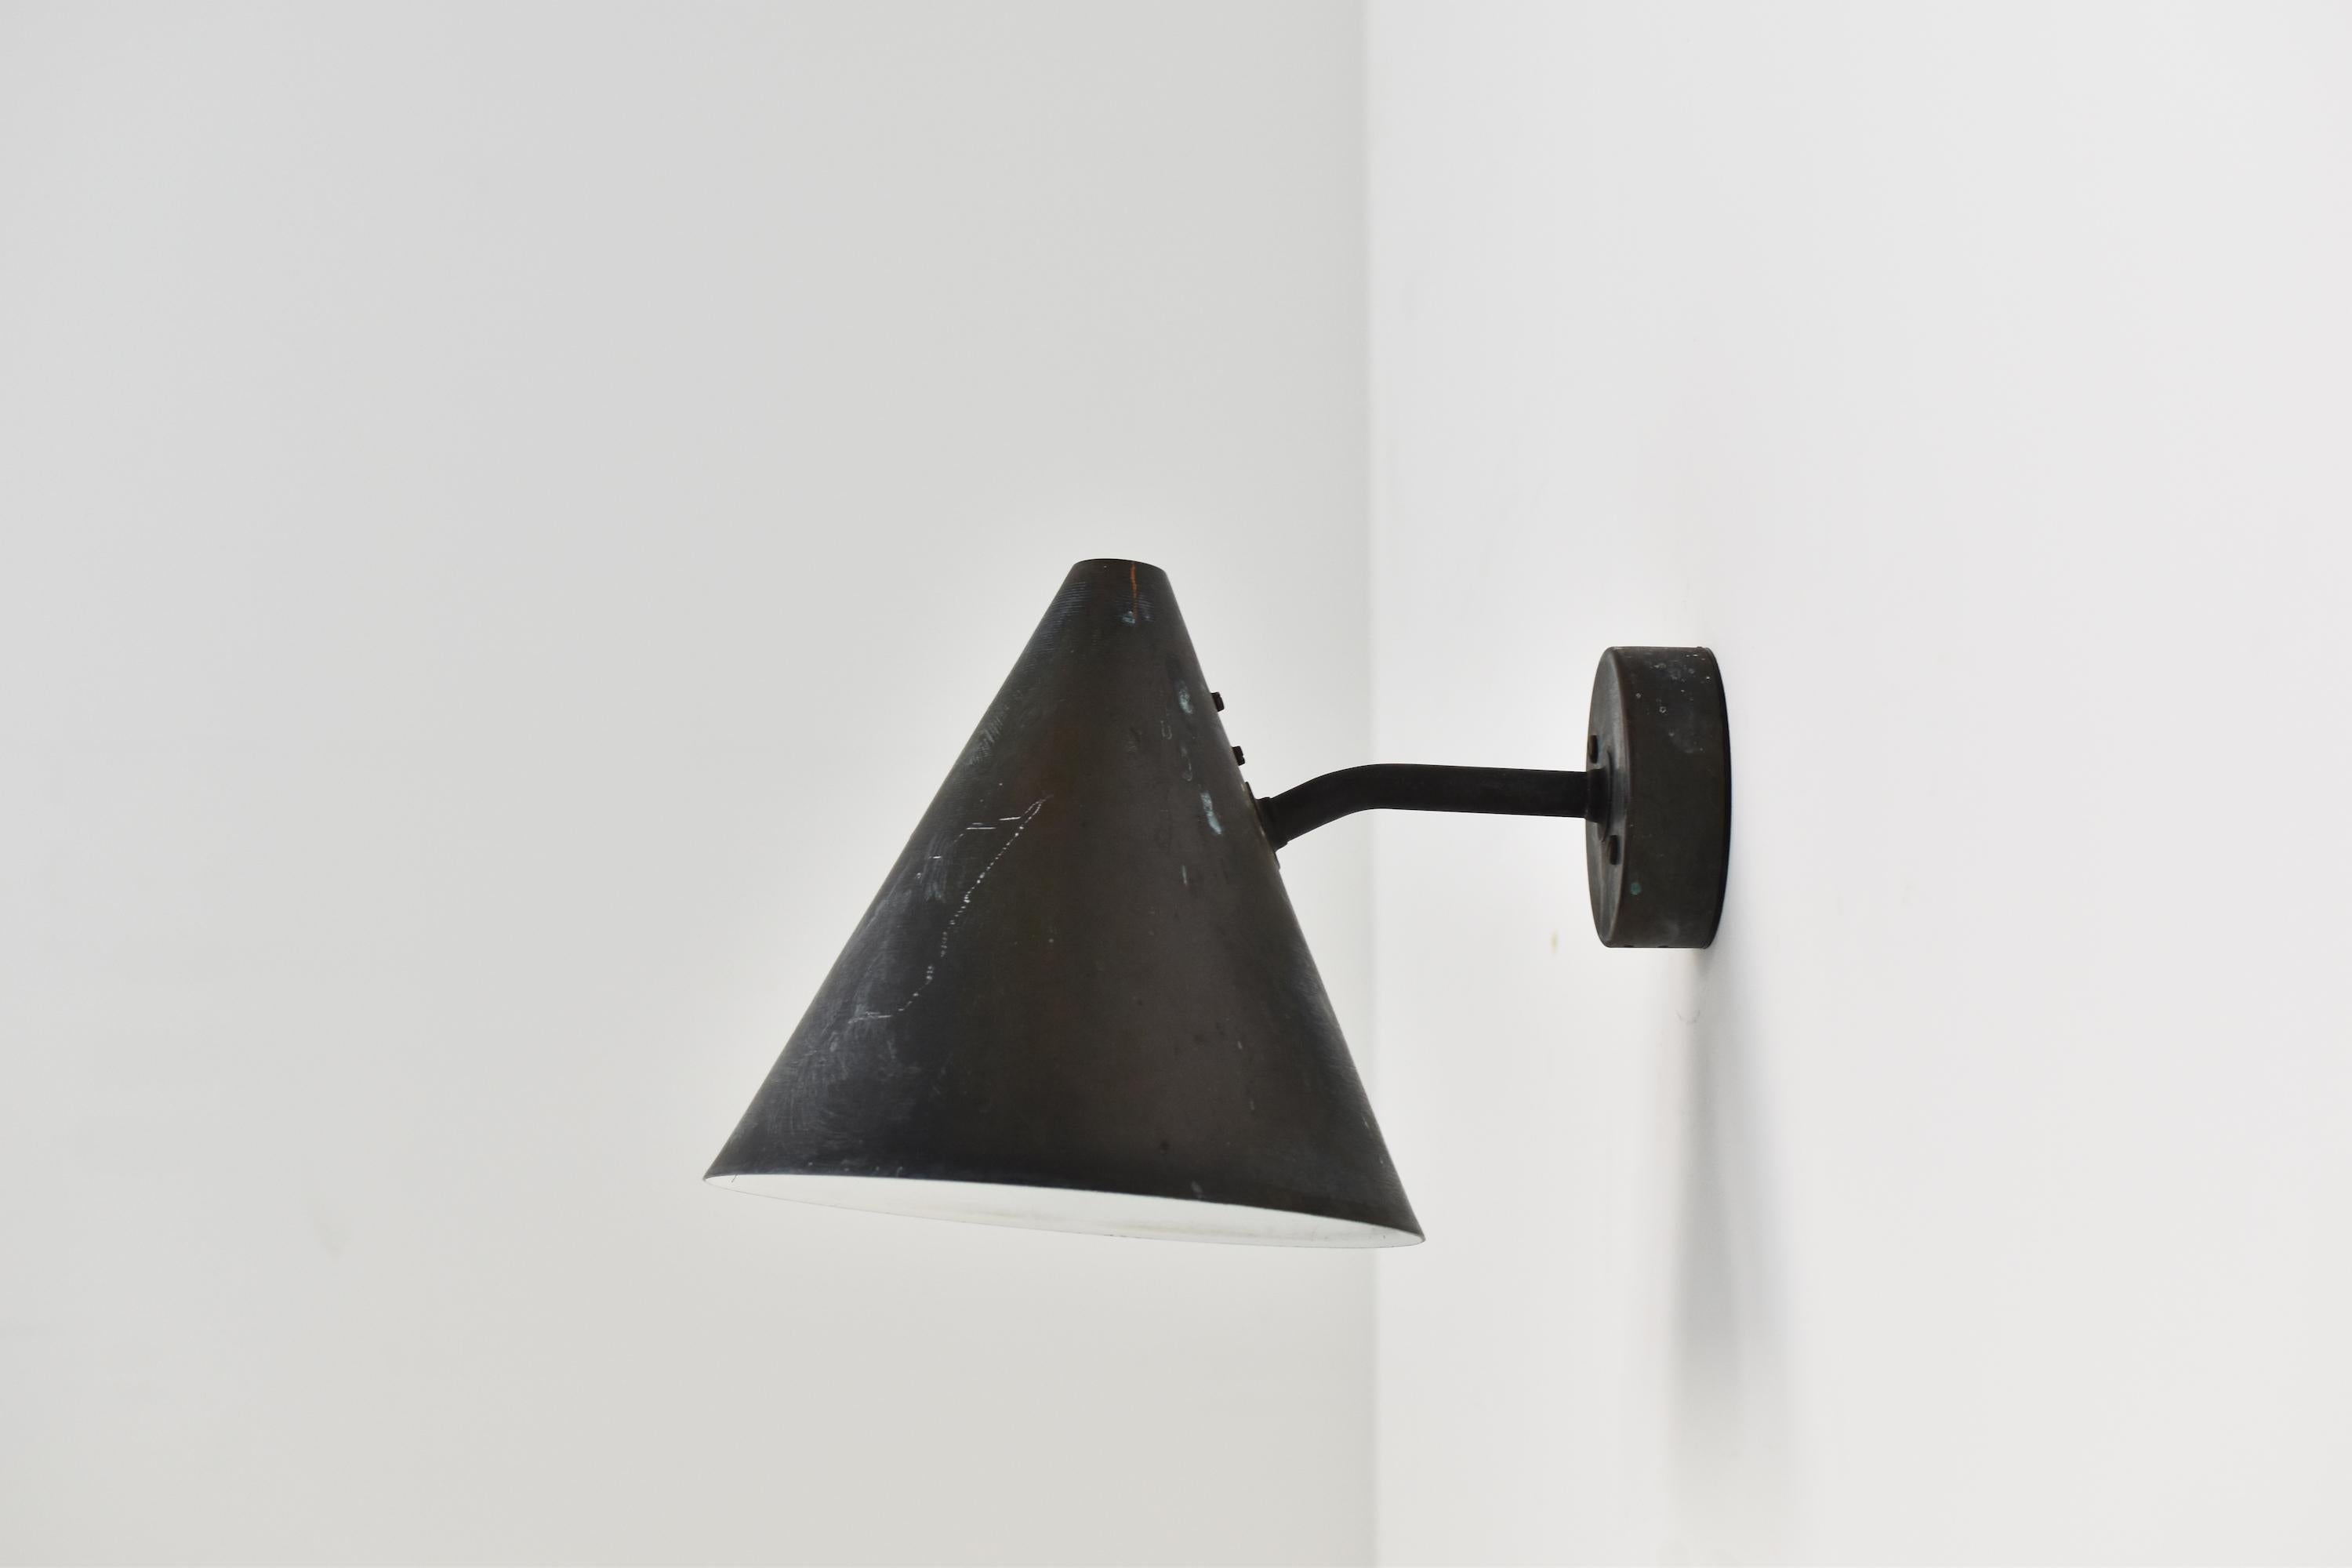 Cone shaped wall lamp by Hans Agne Jakobsson for AB Markaryd, Sweden 1950s. This is model ‘Tratten’ in beautifully patinated copper with an off-white inside. Labeled.